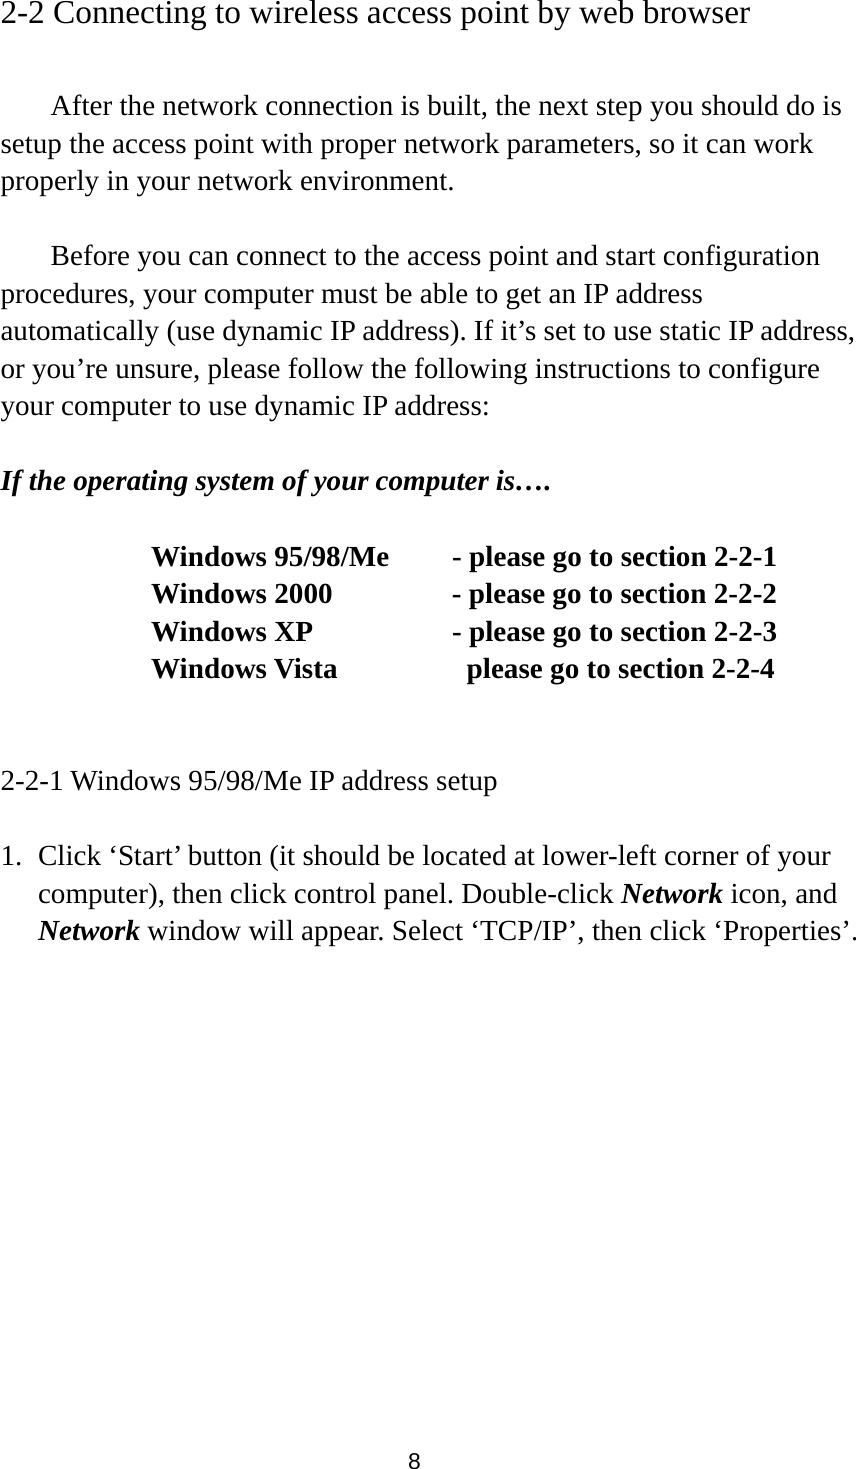  8 2-2 Connecting to wireless access point by web browser    After the network connection is built, the next step you should do is setup the access point with proper network parameters, so it can work properly in your network environment.    Before you can connect to the access point and start configuration procedures, your computer must be able to get an IP address automatically (use dynamic IP address). If it’s set to use static IP address, or you’re unsure, please follow the following instructions to configure your computer to use dynamic IP address:  If the operating system of your computer is….     Windows 95/98/Me    - please go to section 2-2-1       Windows 2000           - please go to section 2-2-2         Windows XP      - please go to section 2-2-3       Windows Vista        please go to section 2-2-4   2-2-1 Windows 95/98/Me IP address setup  1. Click ‘Start’ button (it should be located at lower-left corner of your computer), then click control panel. Double-click Network icon, and Network window will appear. Select ‘TCP/IP’, then click ‘Properties’.  